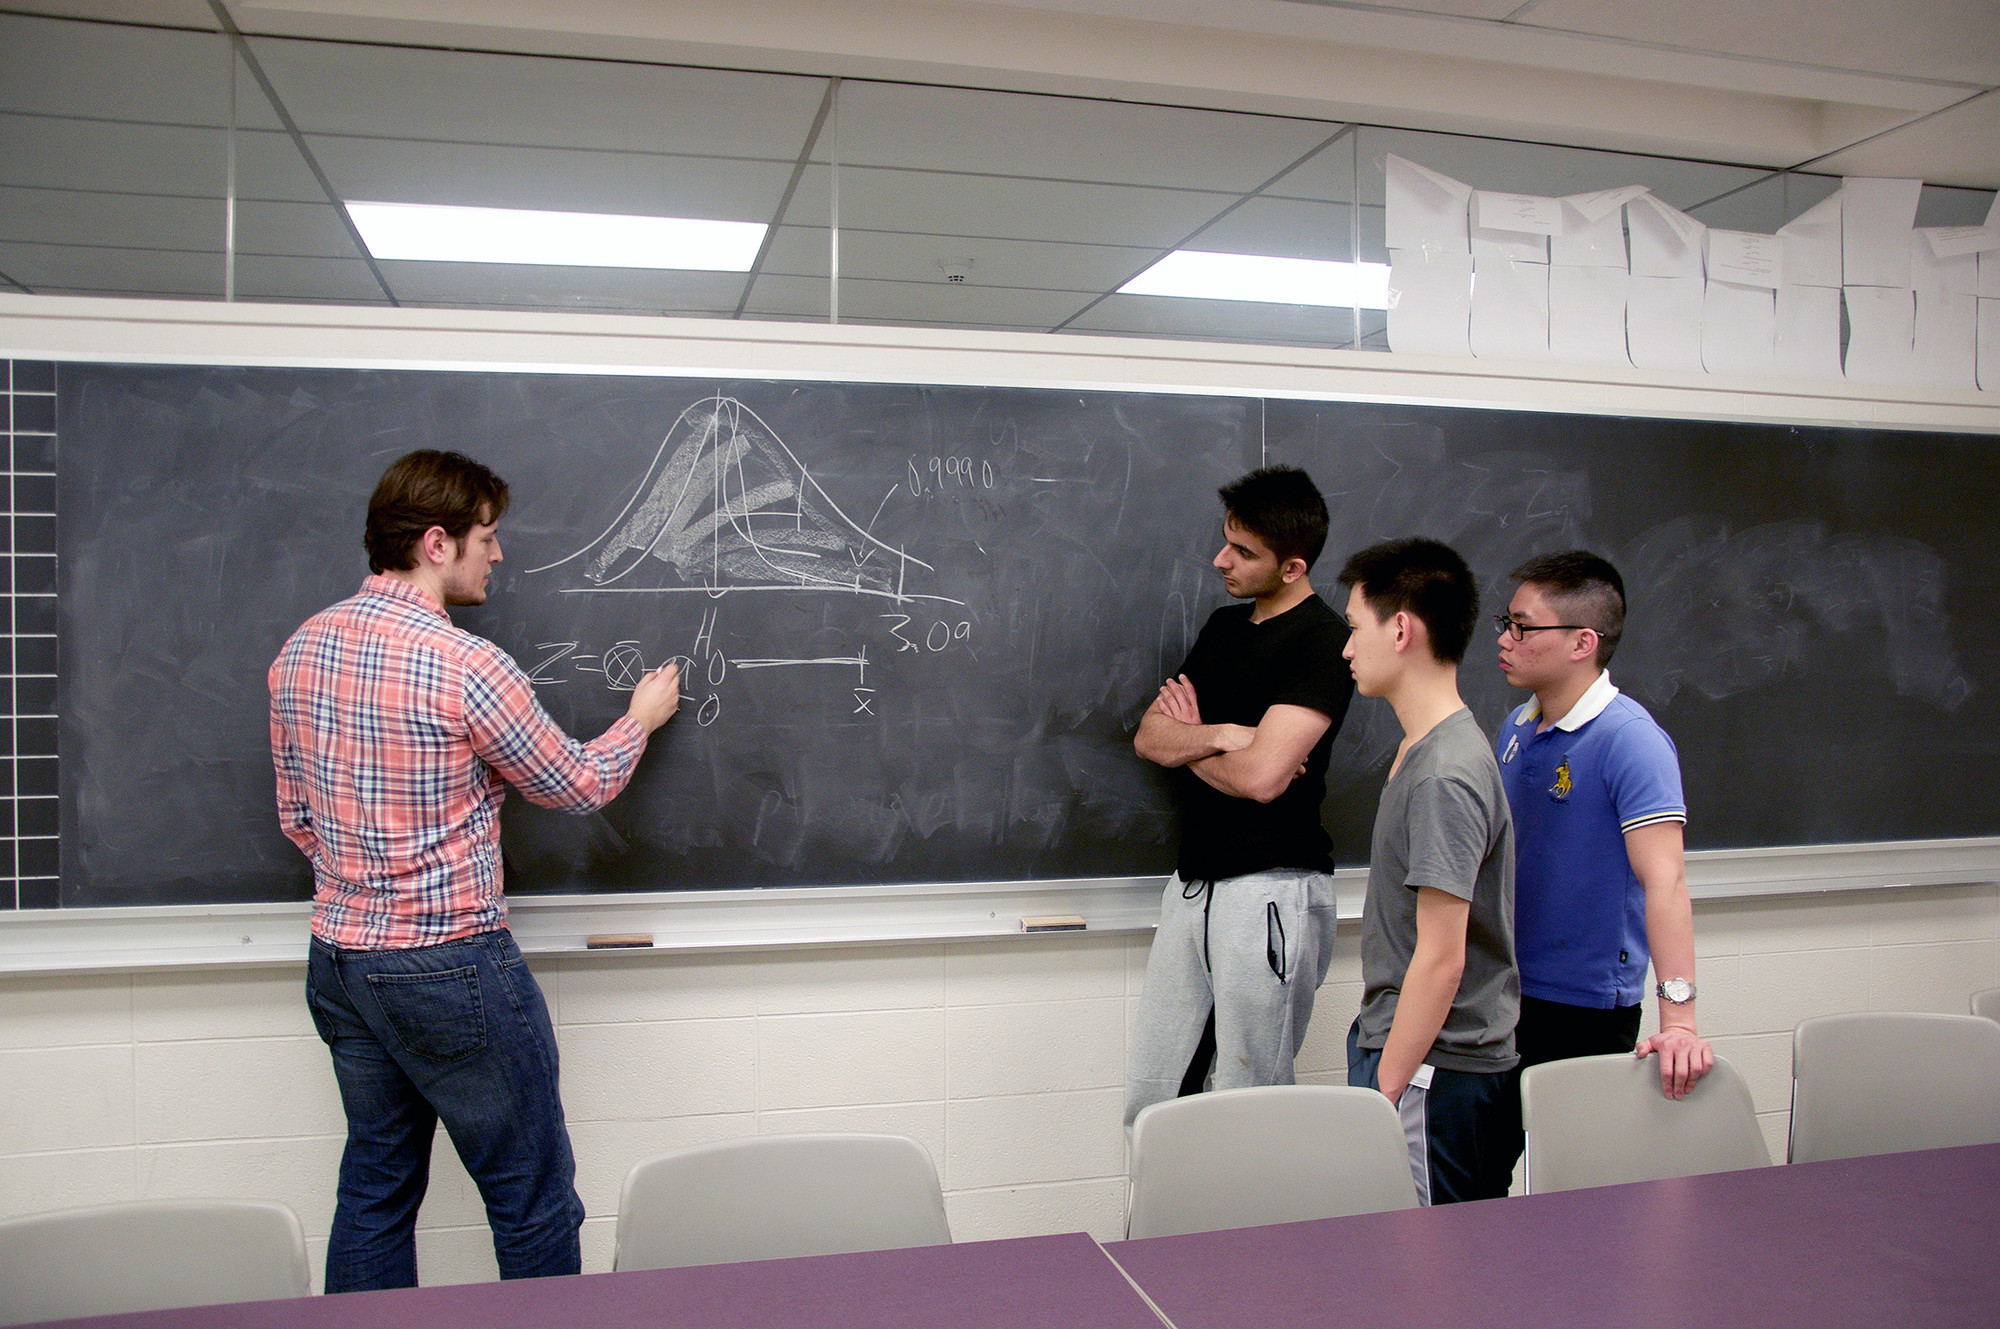 Professor drawing a graph on a chalkboard while two students watch